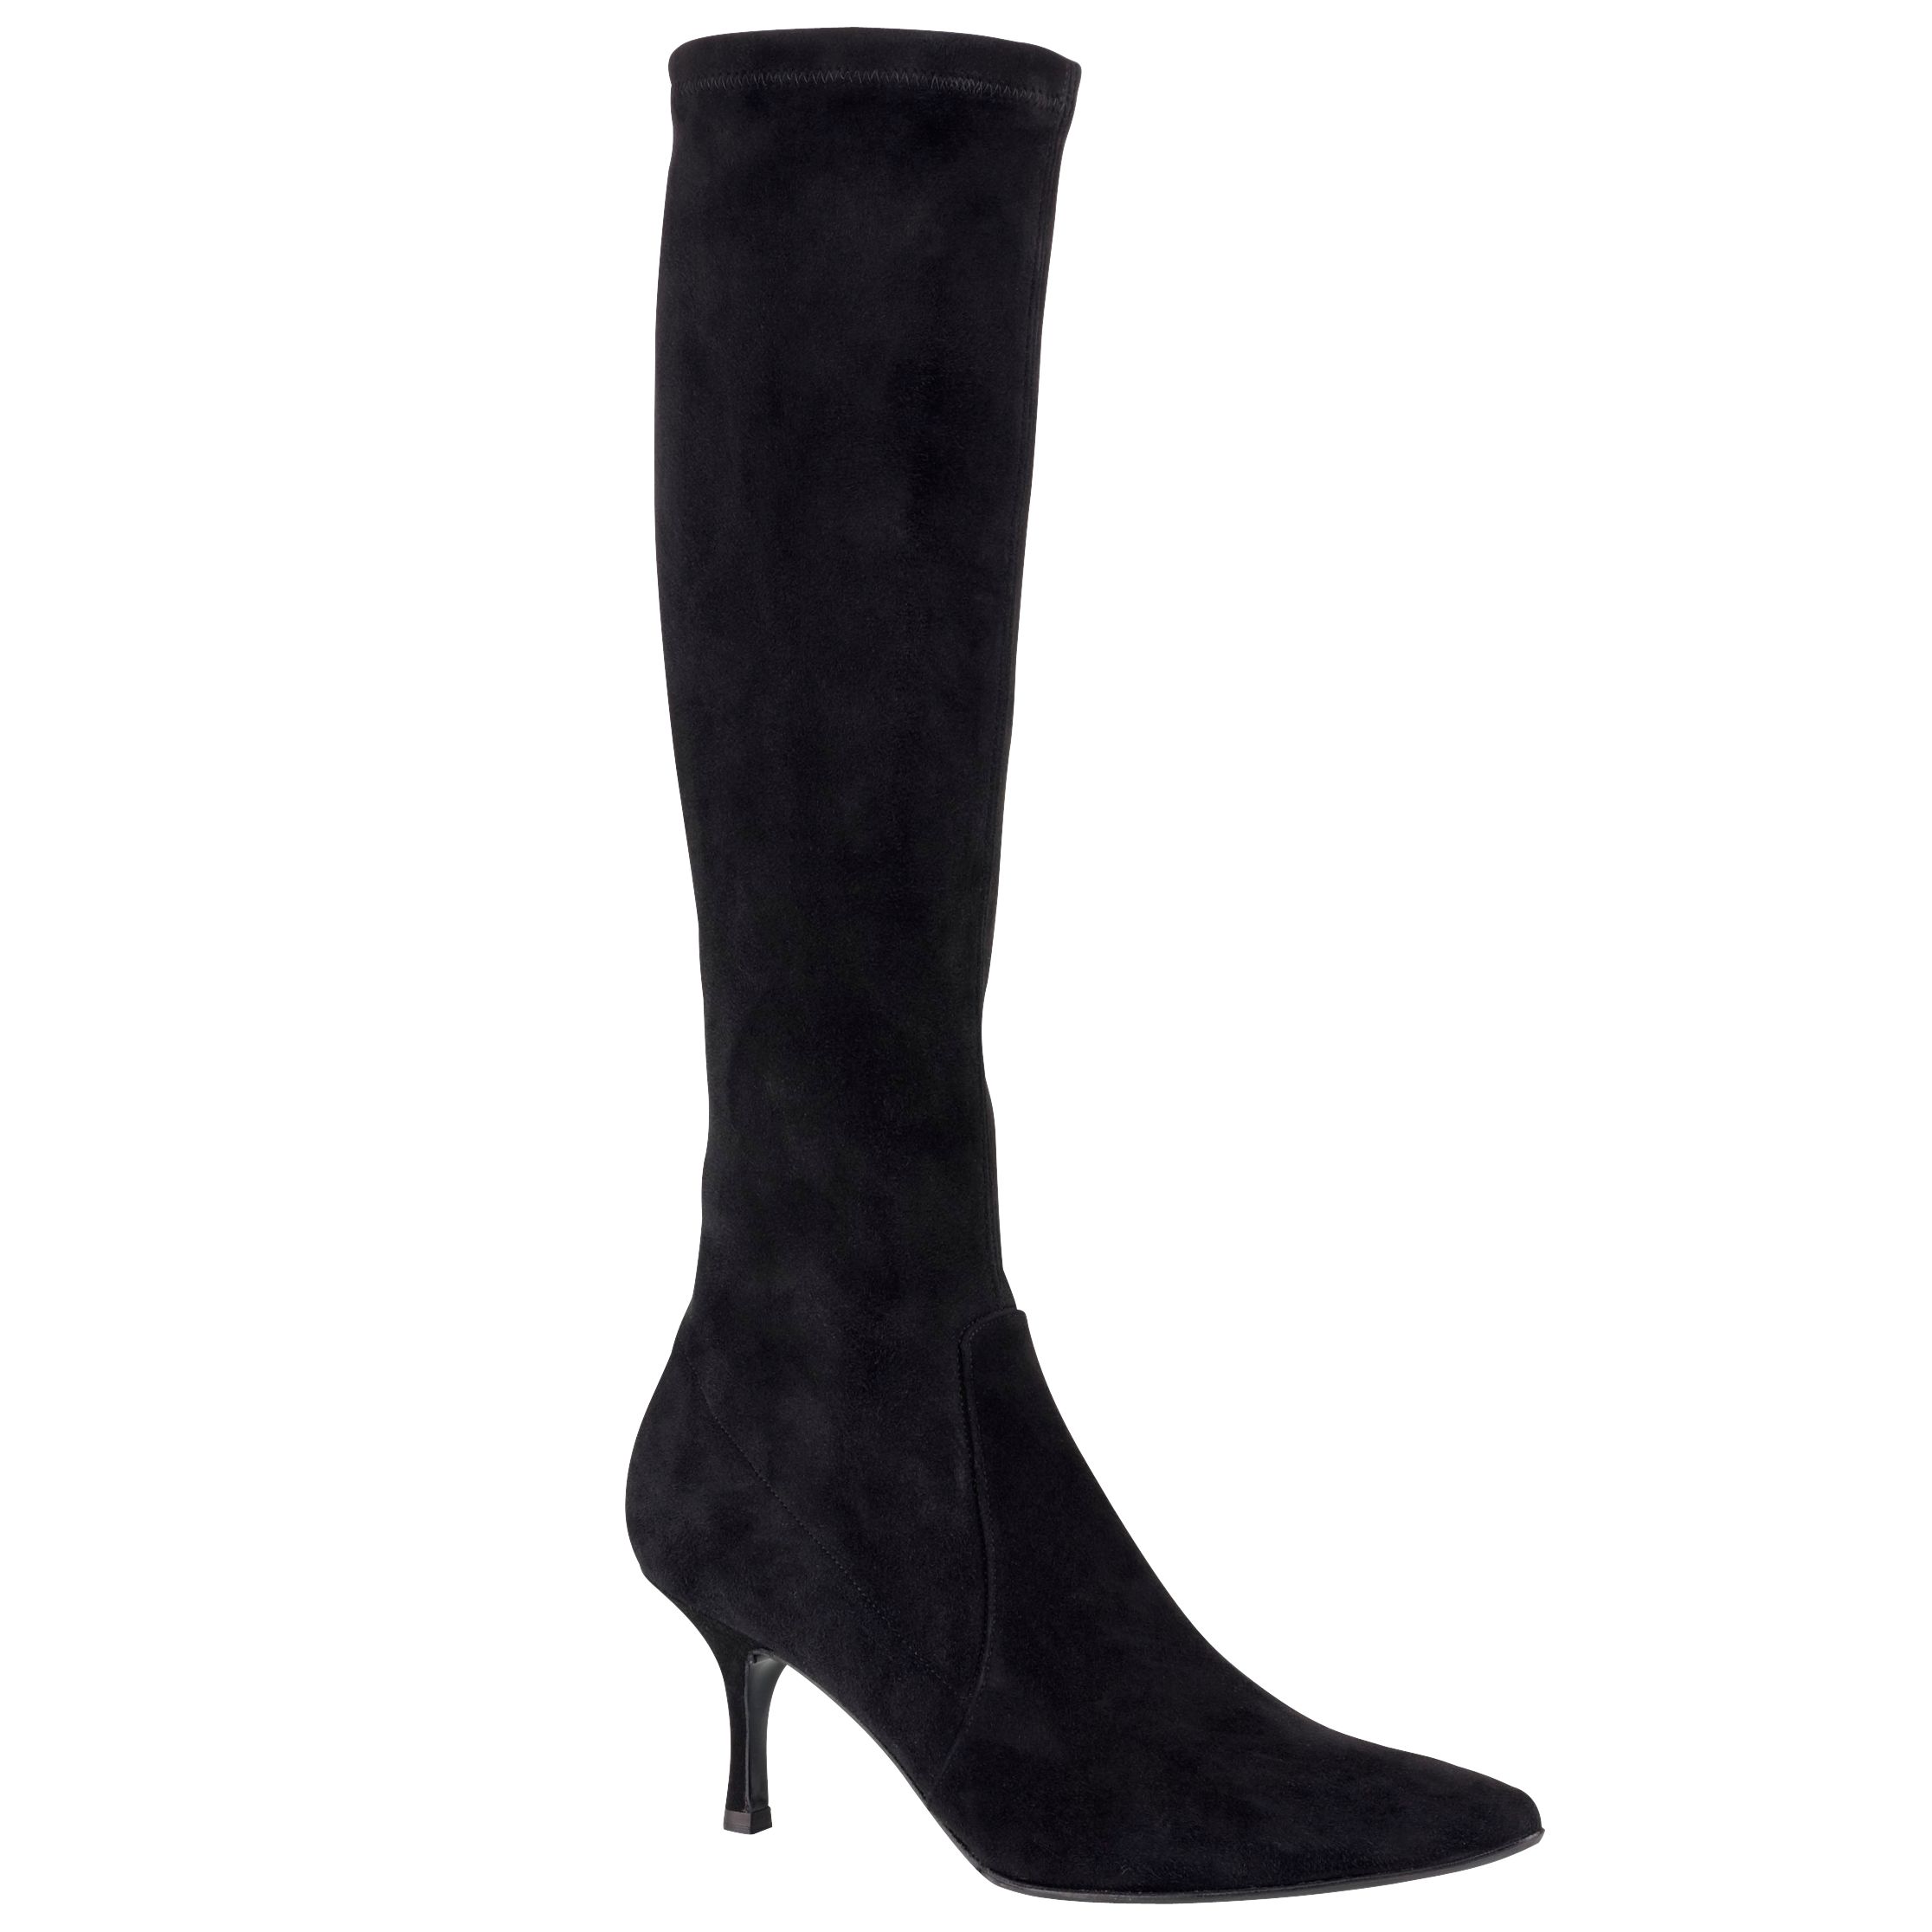 L.K.Bennett Pointed Toe Stretch Knee High Boots, Black at JohnLewis